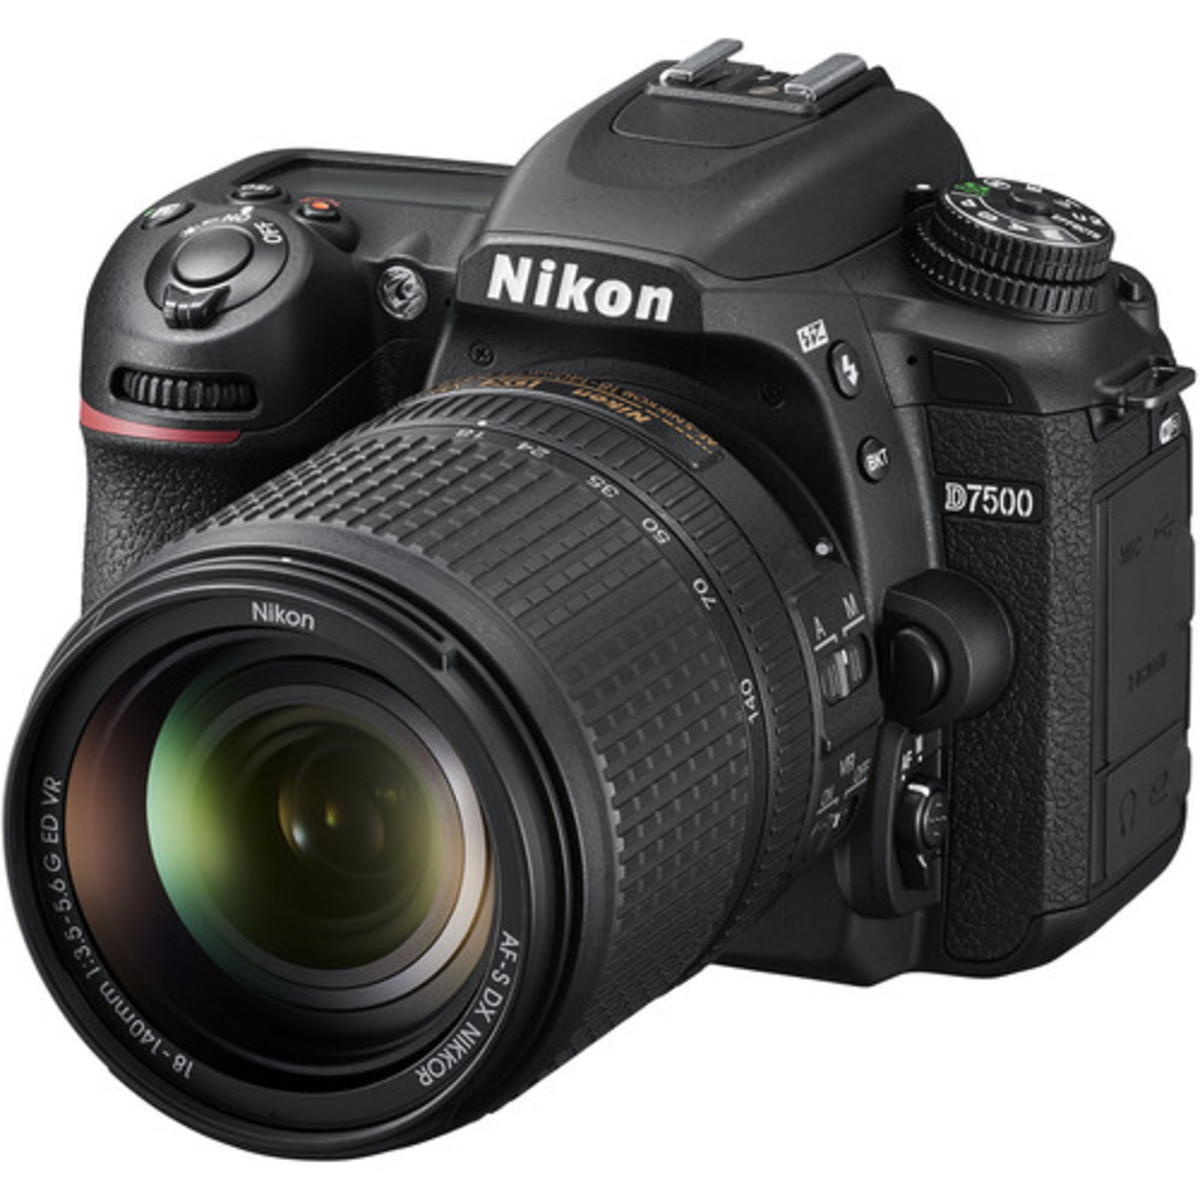 D7500 DSLR Camera with 18-140mm Lens (Parallel imported)